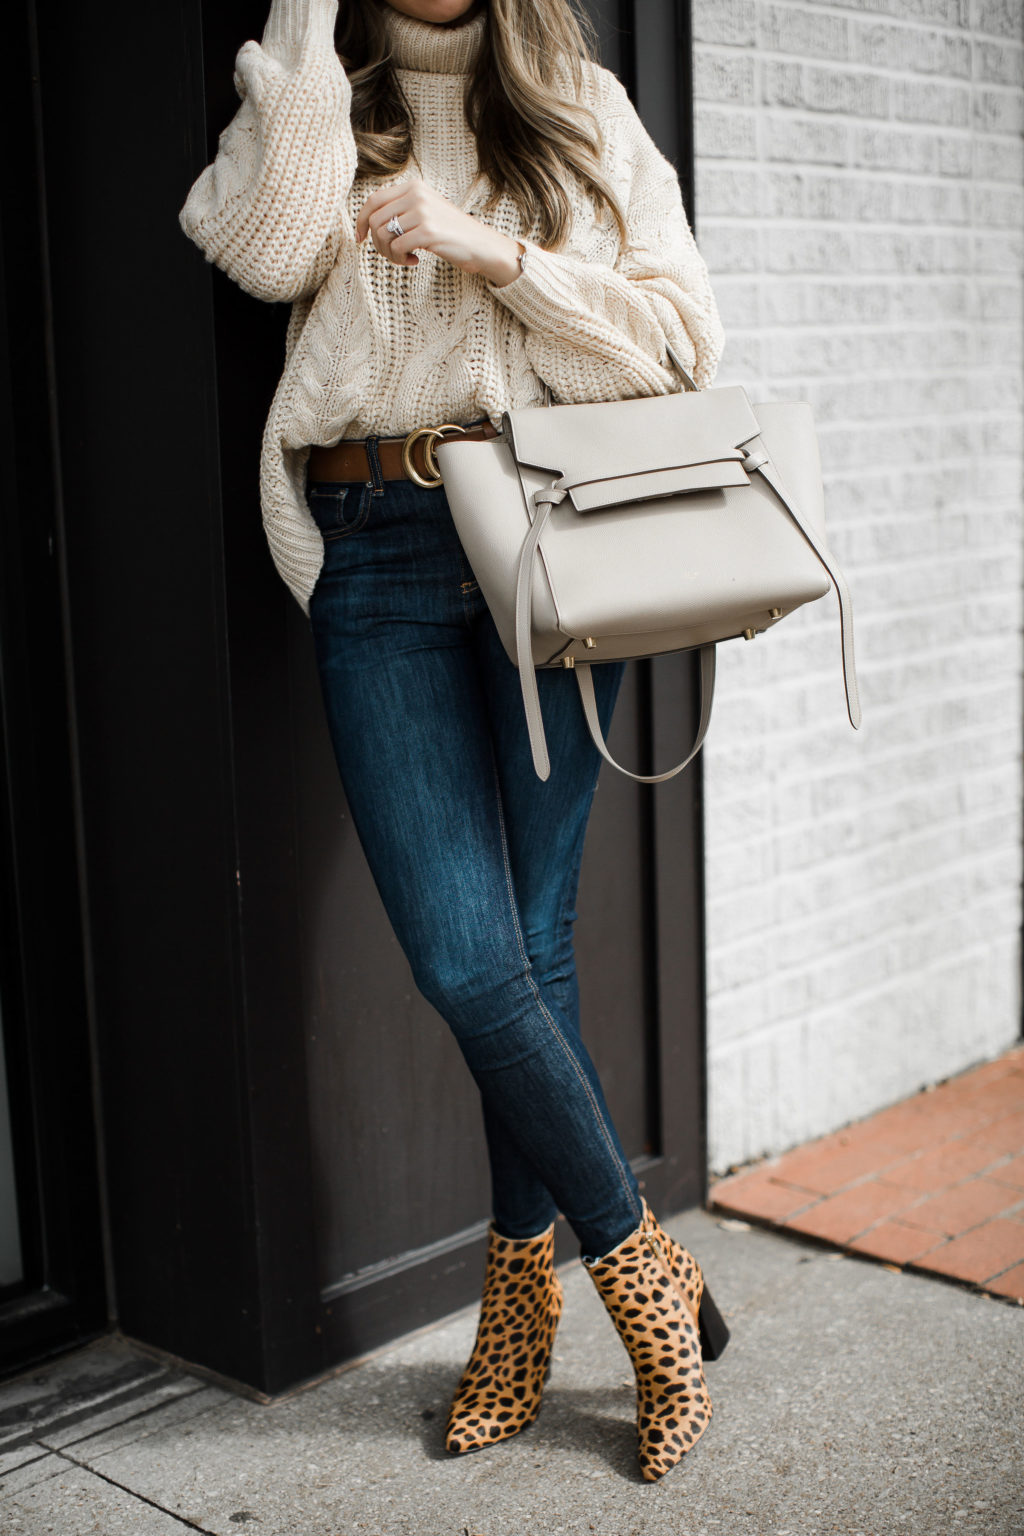 All the Neutral Chunky Knits I’m Loving Right Now